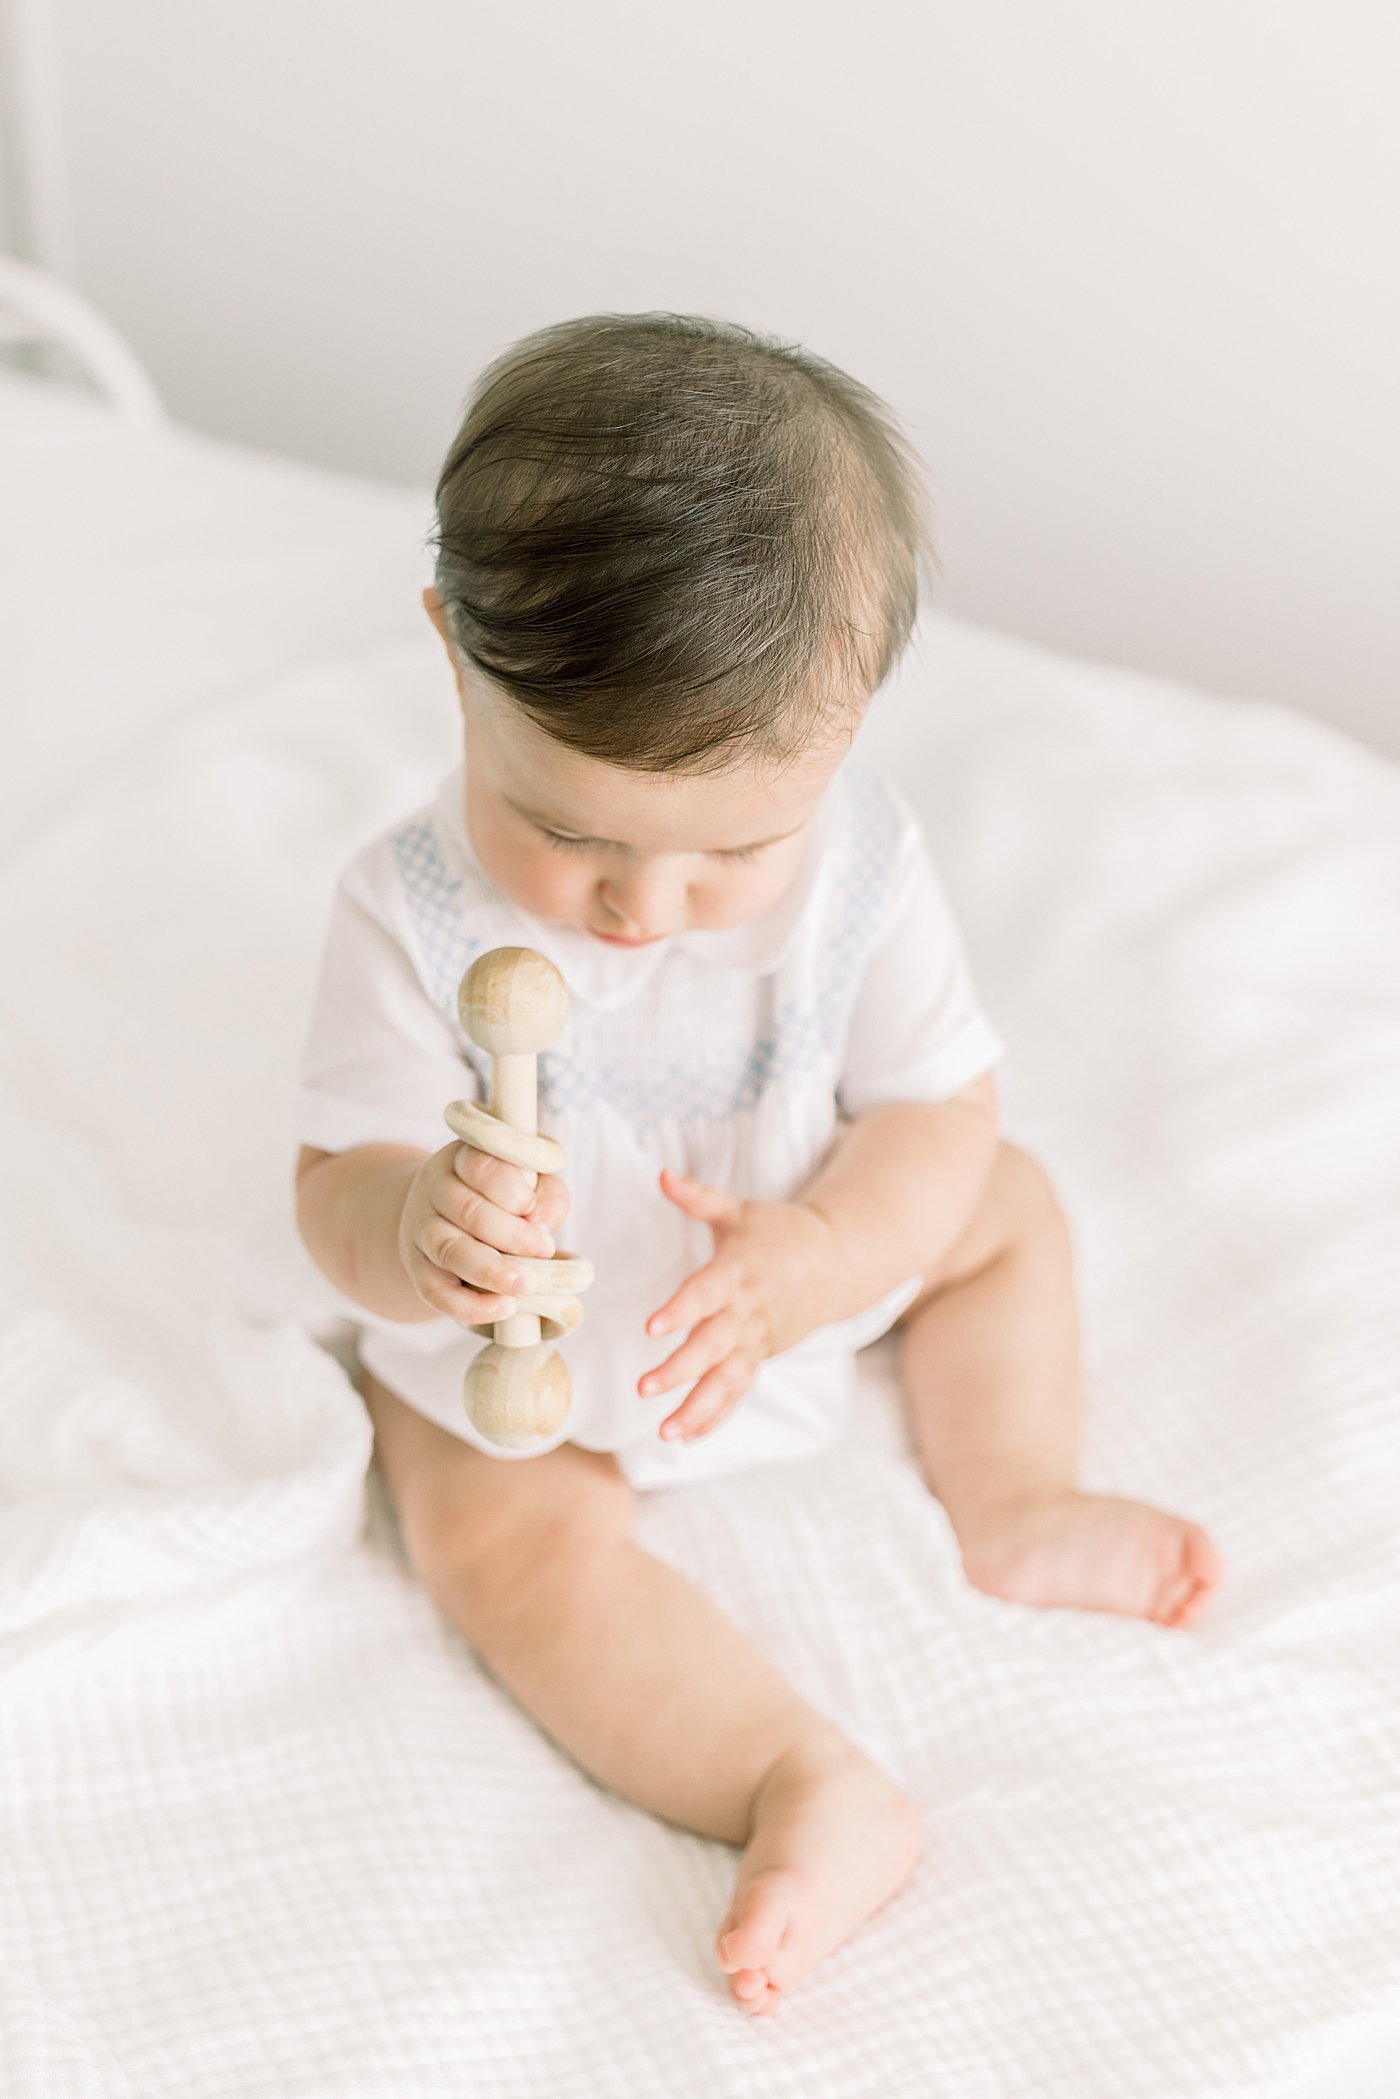 Baby playing with a wooden toy in a softly lit room | Images by Caitlyn Motycka